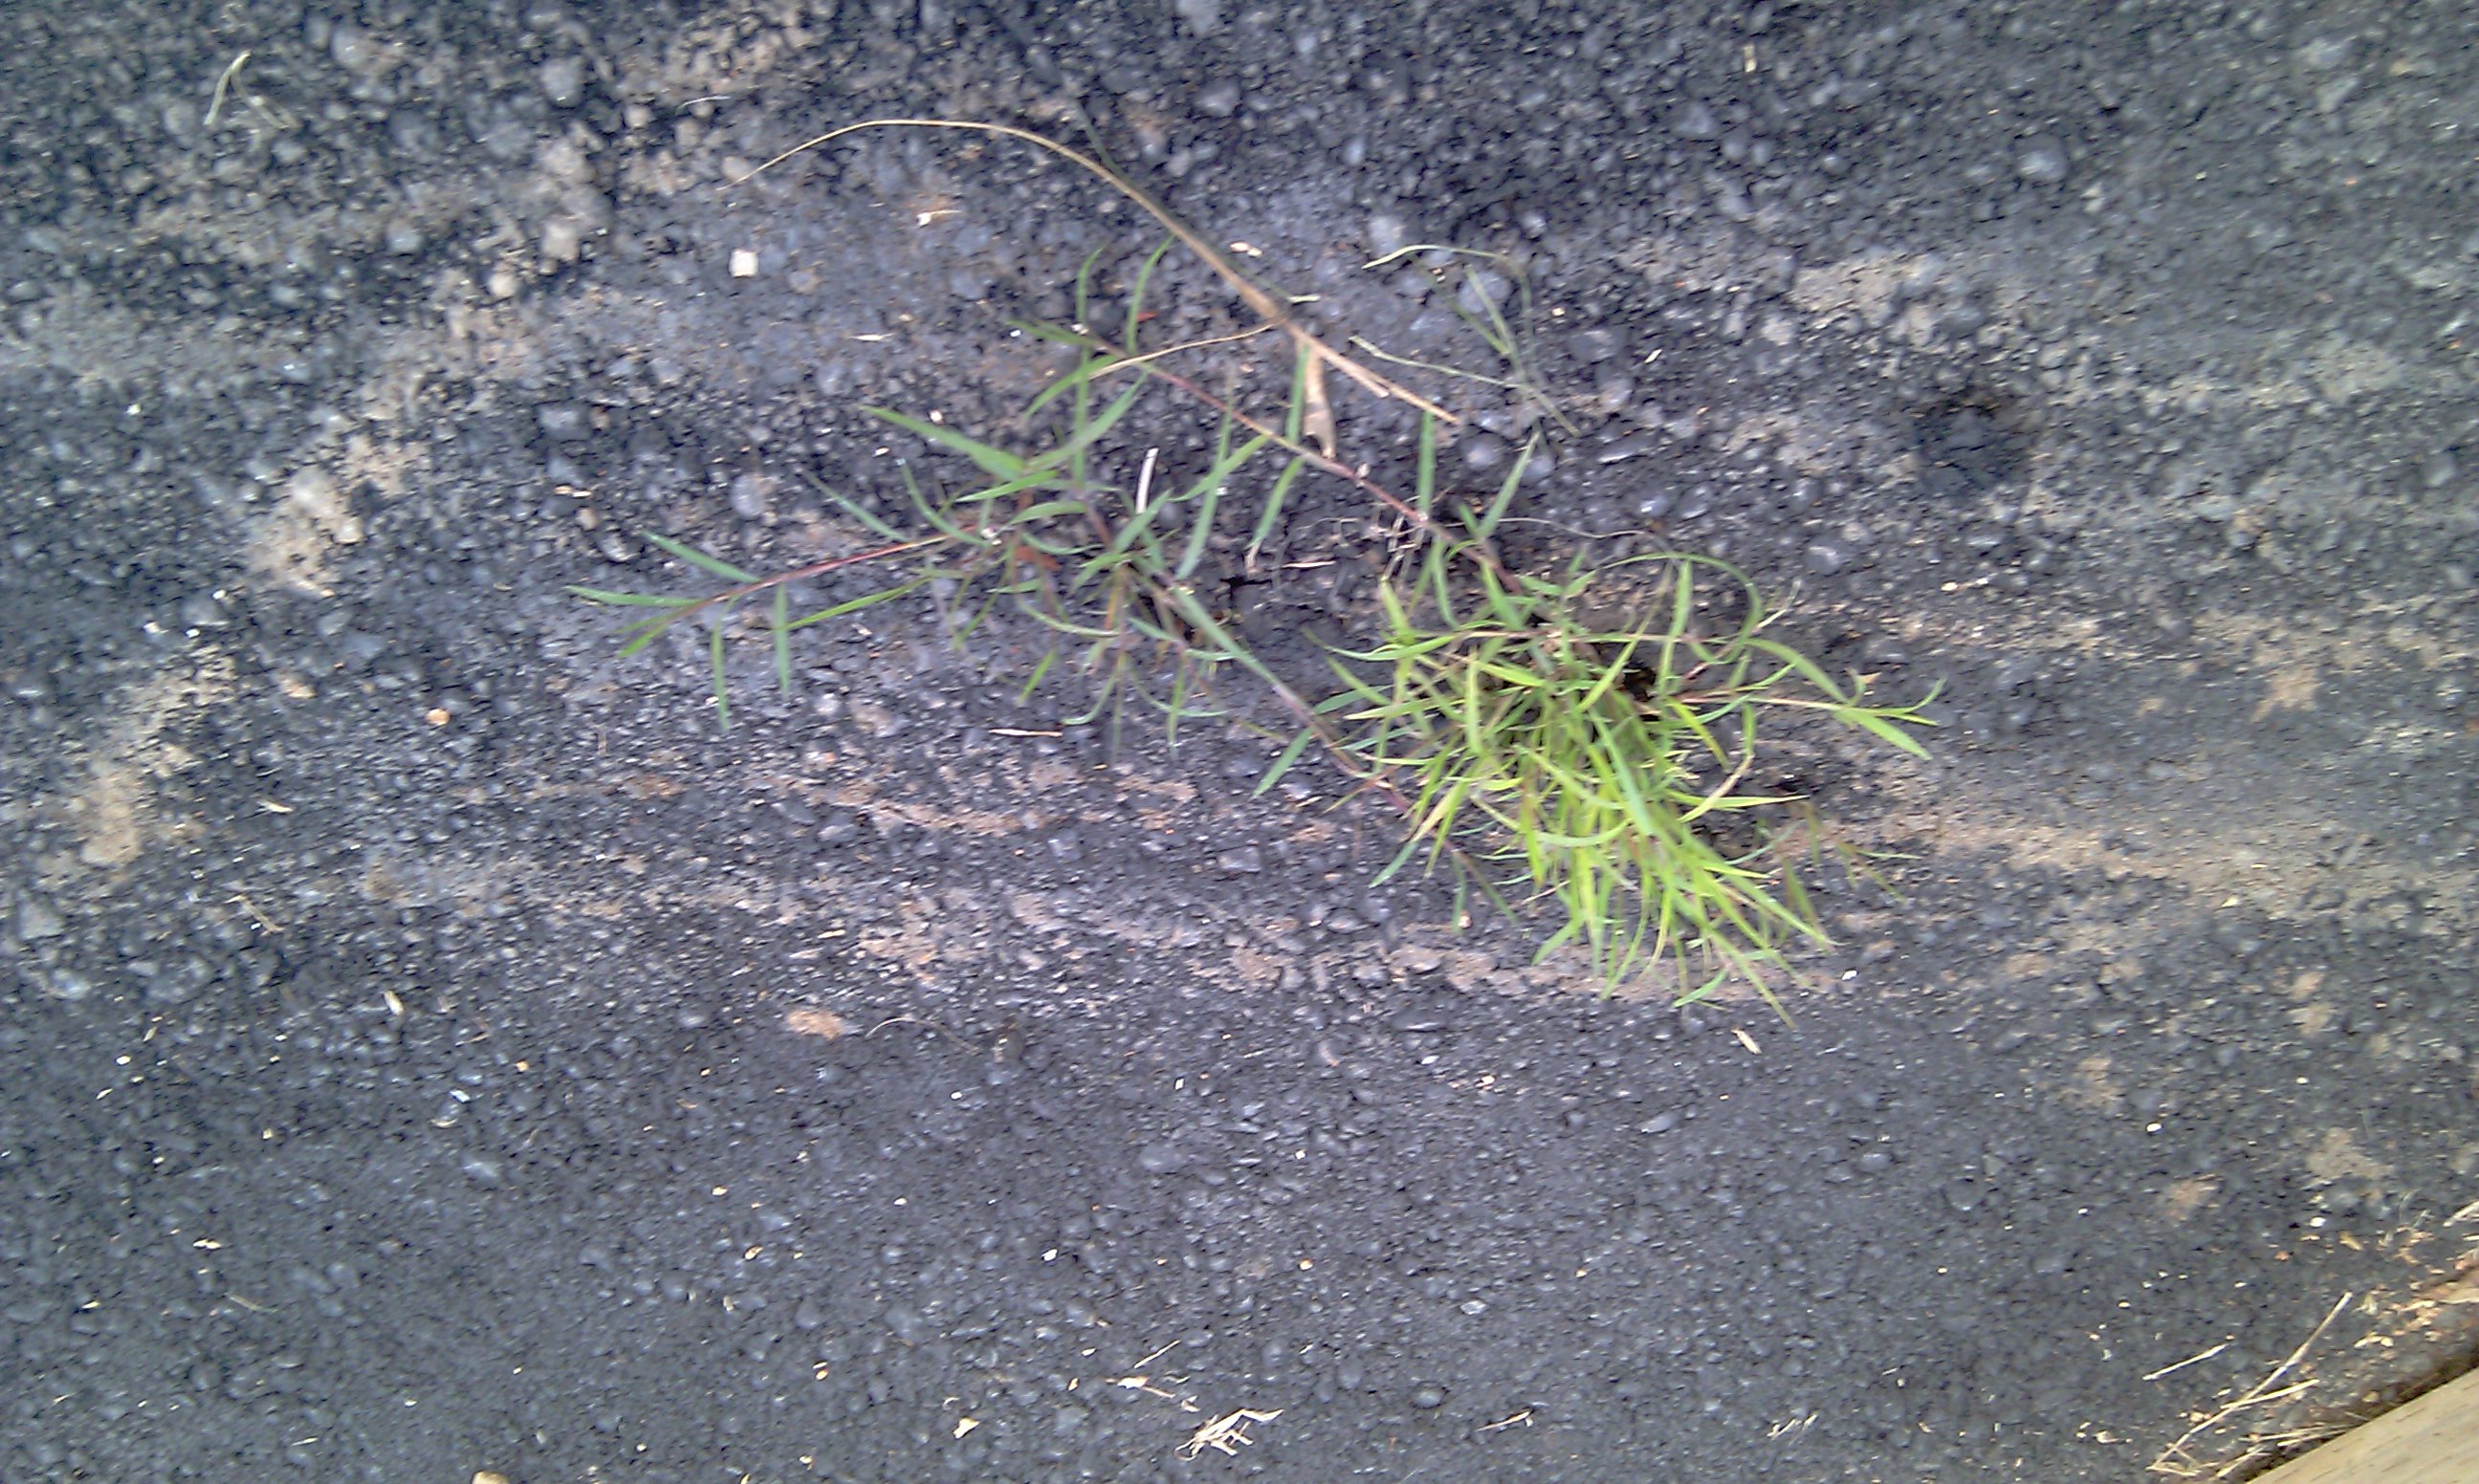 more weeds and cracks